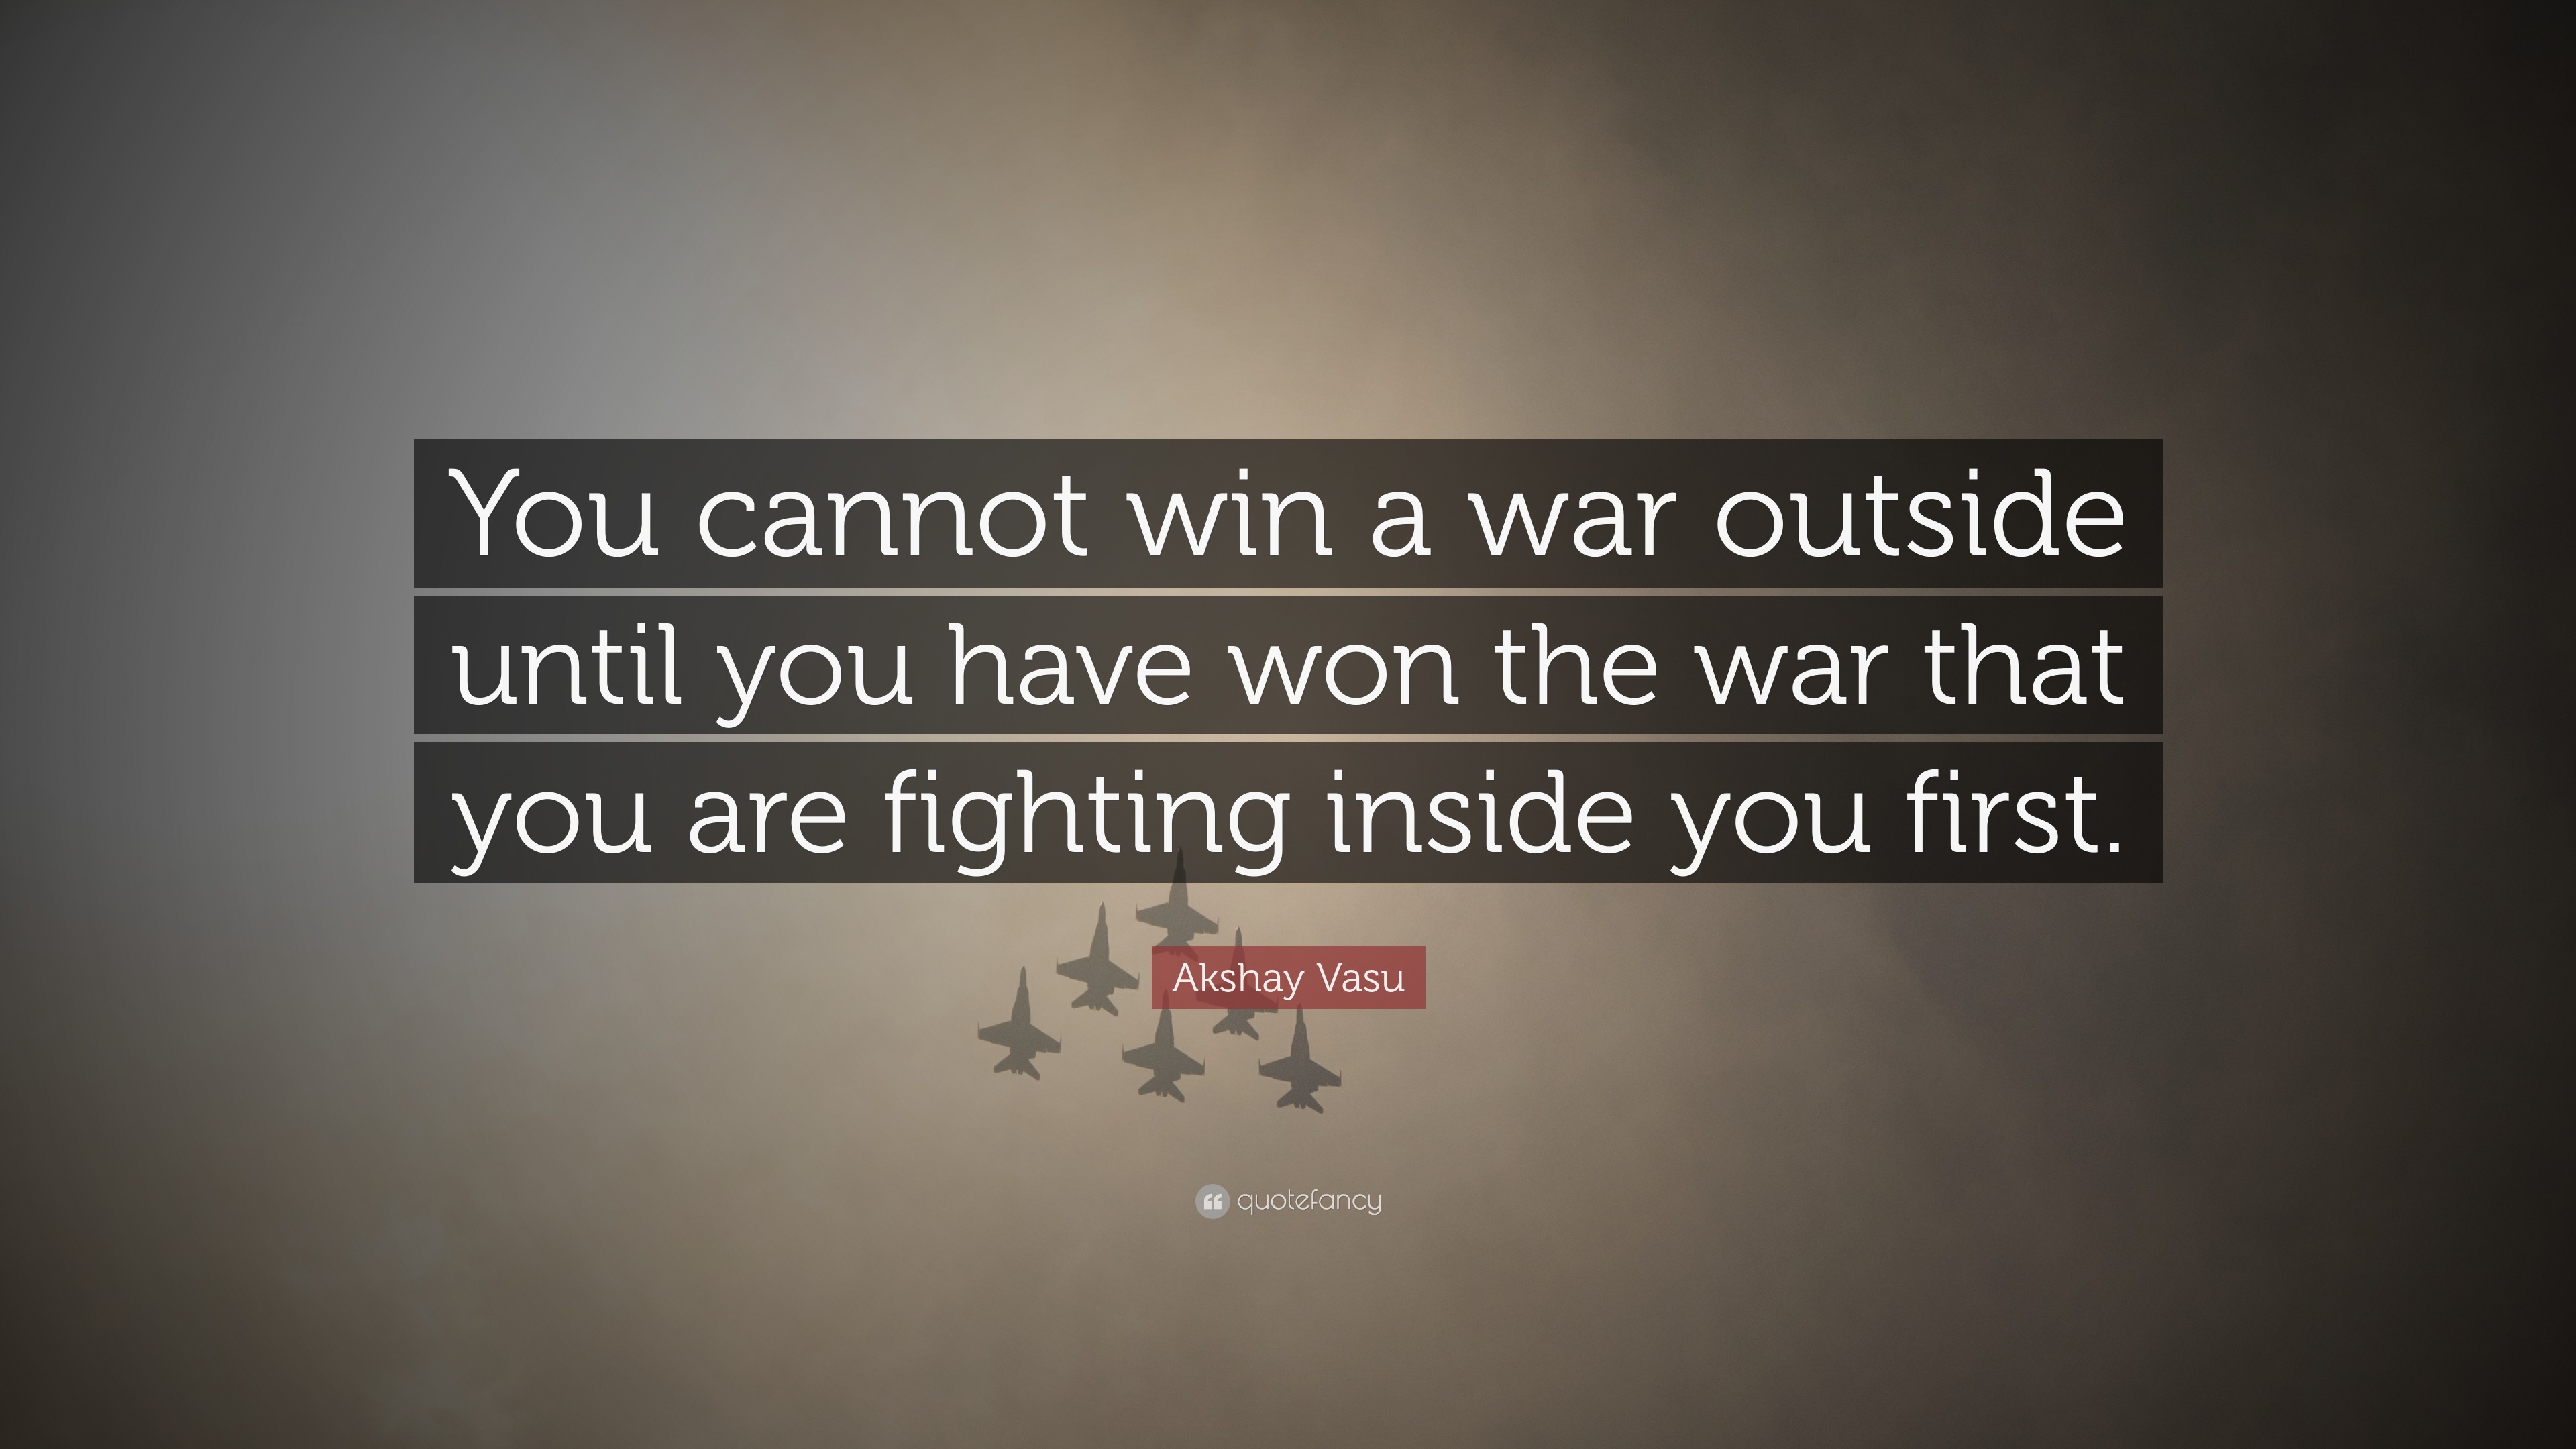 Fighting on the inside vs fighting on the outside